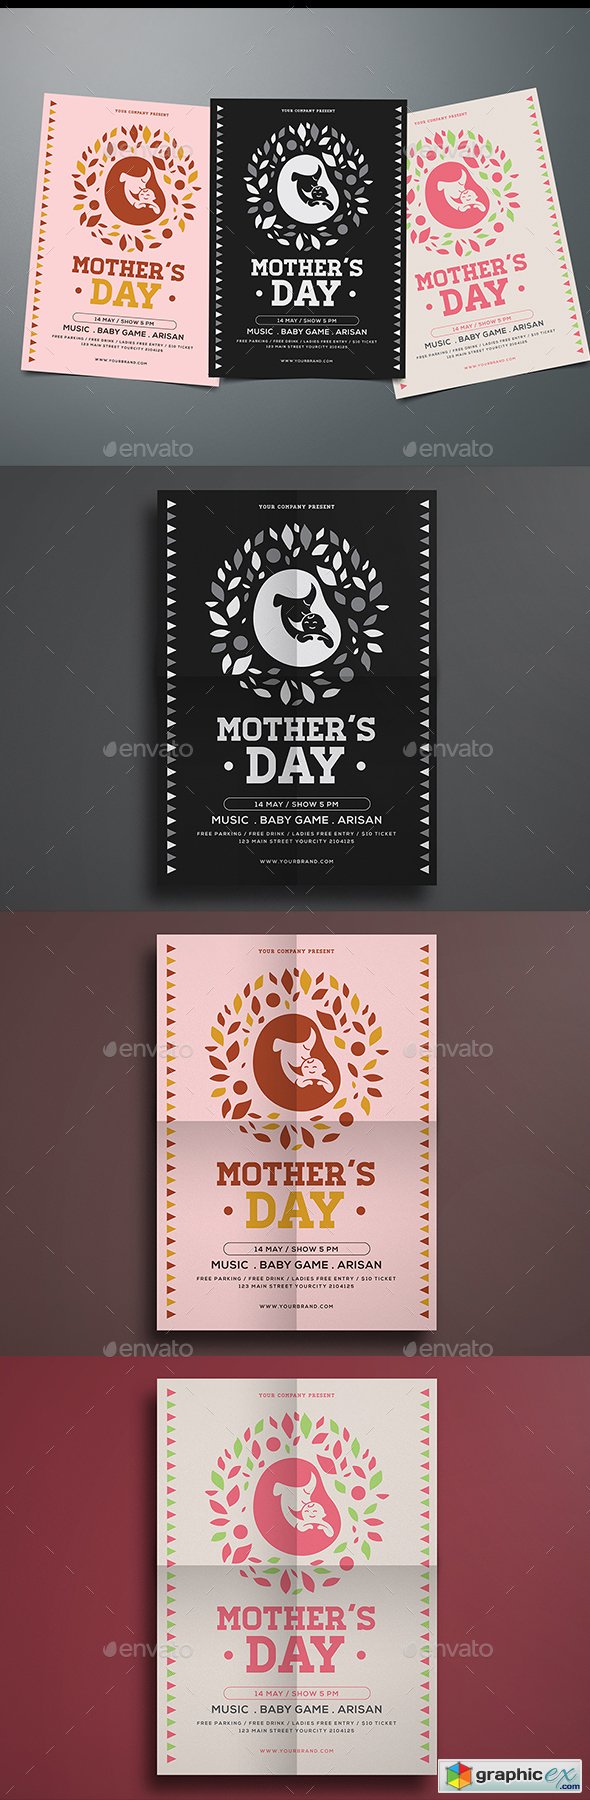 Simple Mother's Day Flyer